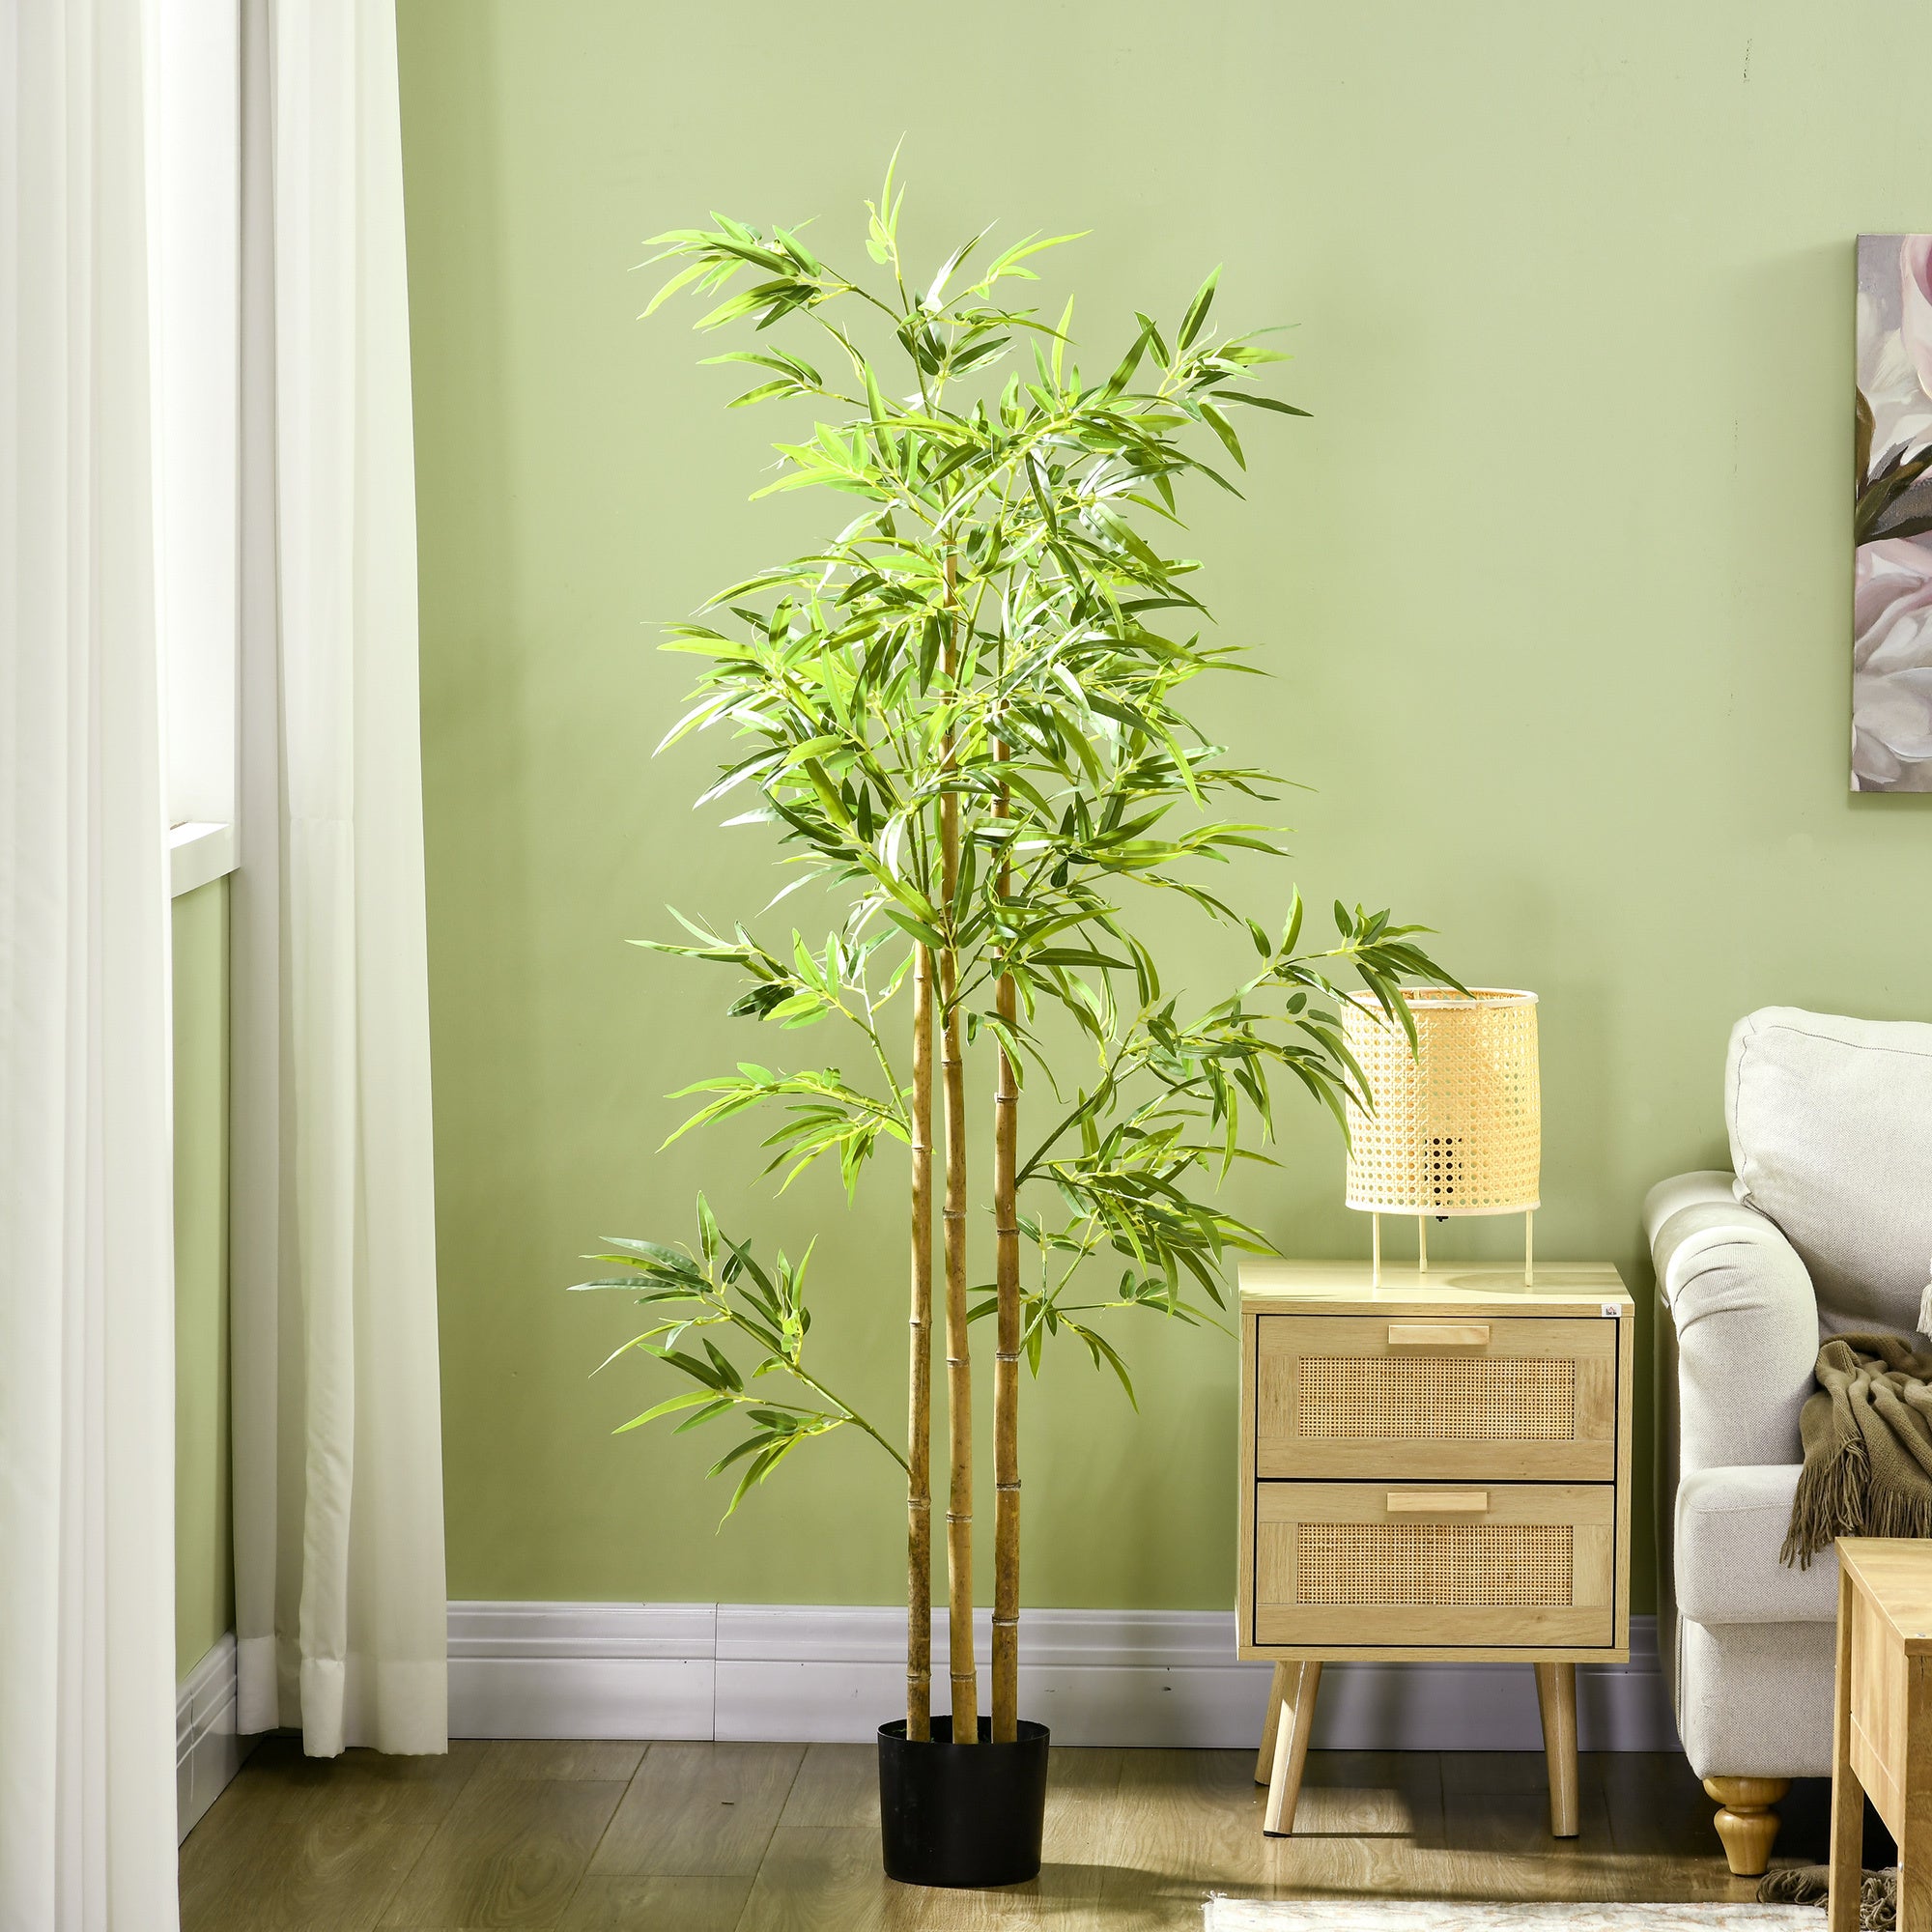 6ft Artificial Bamboo Tree, Faux Decorative Plant